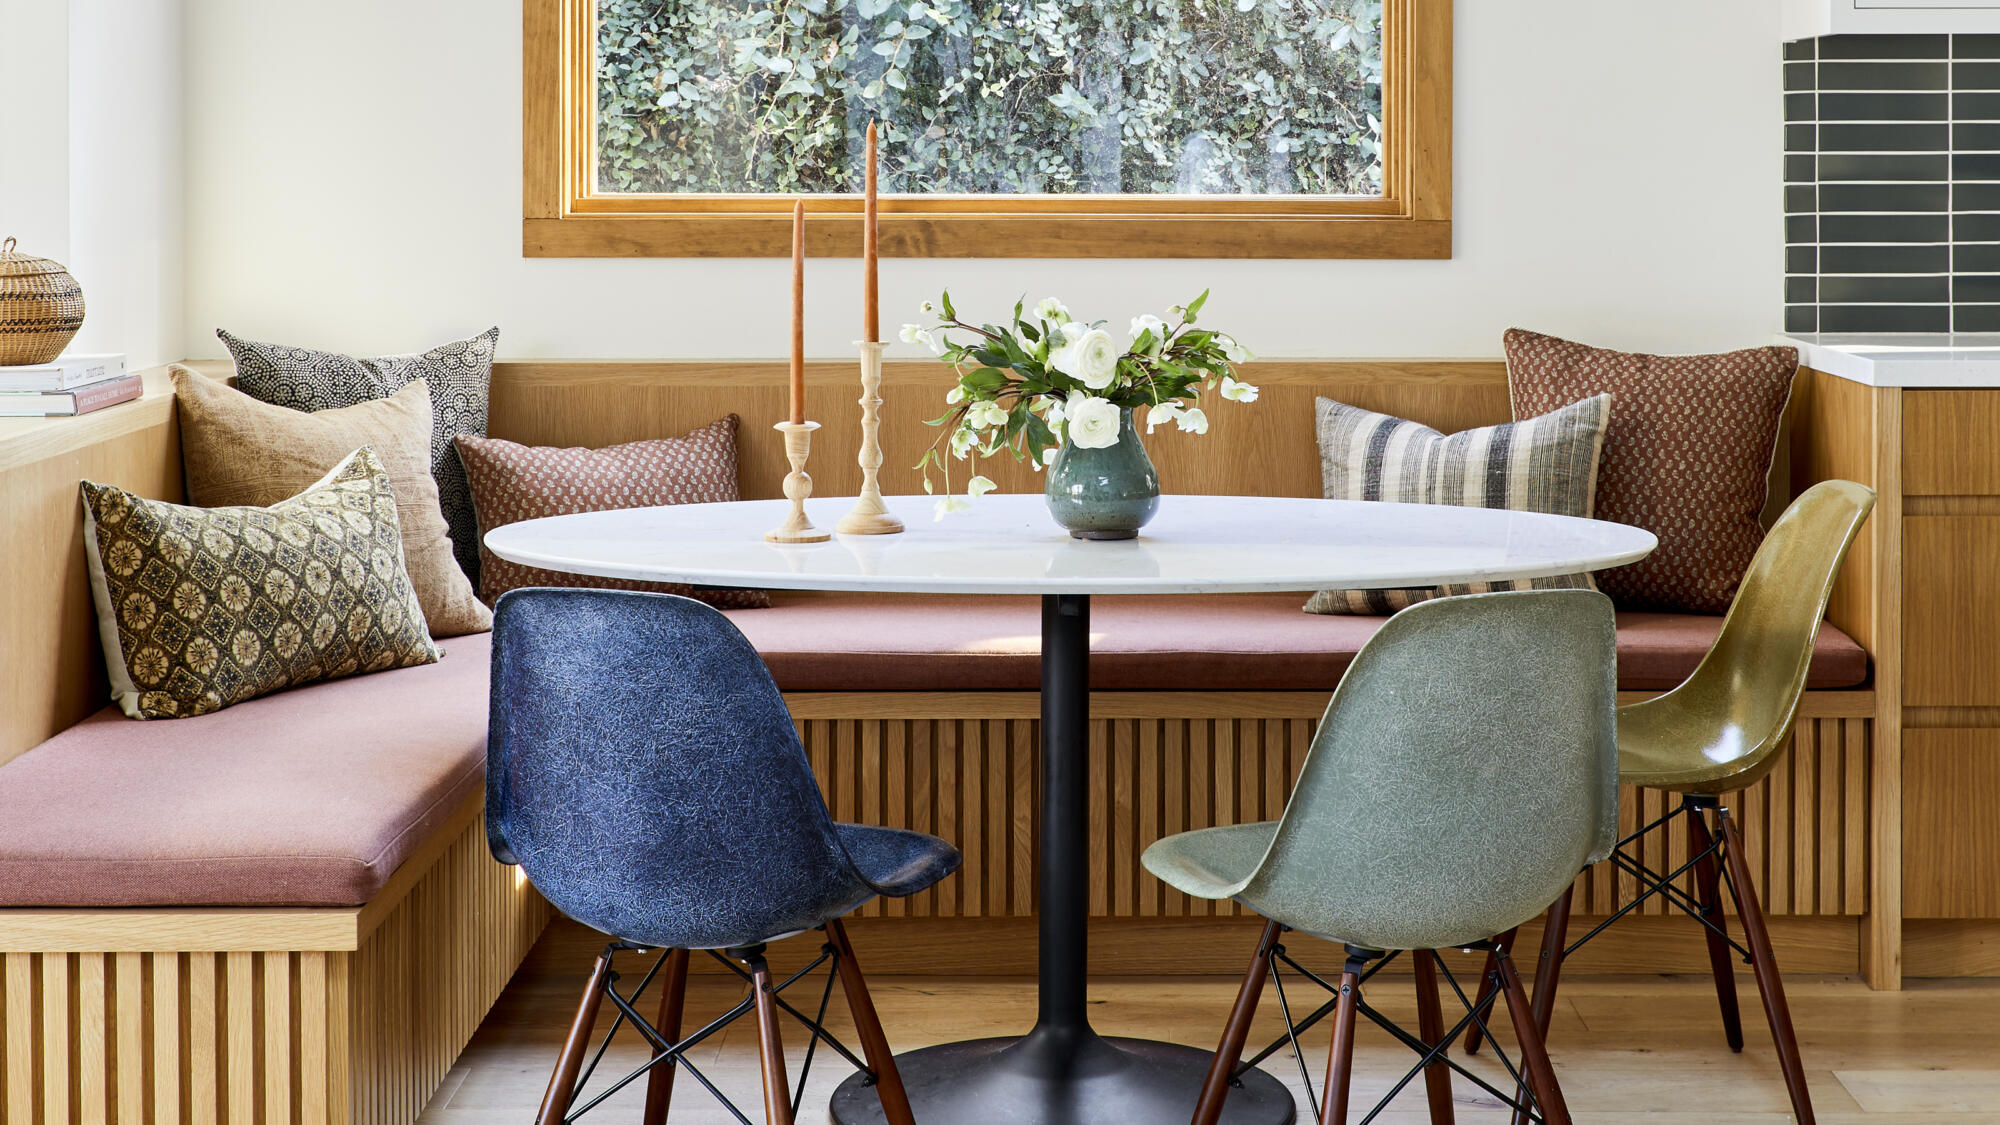 Cozy dining nook with modern chairs and wood accents.